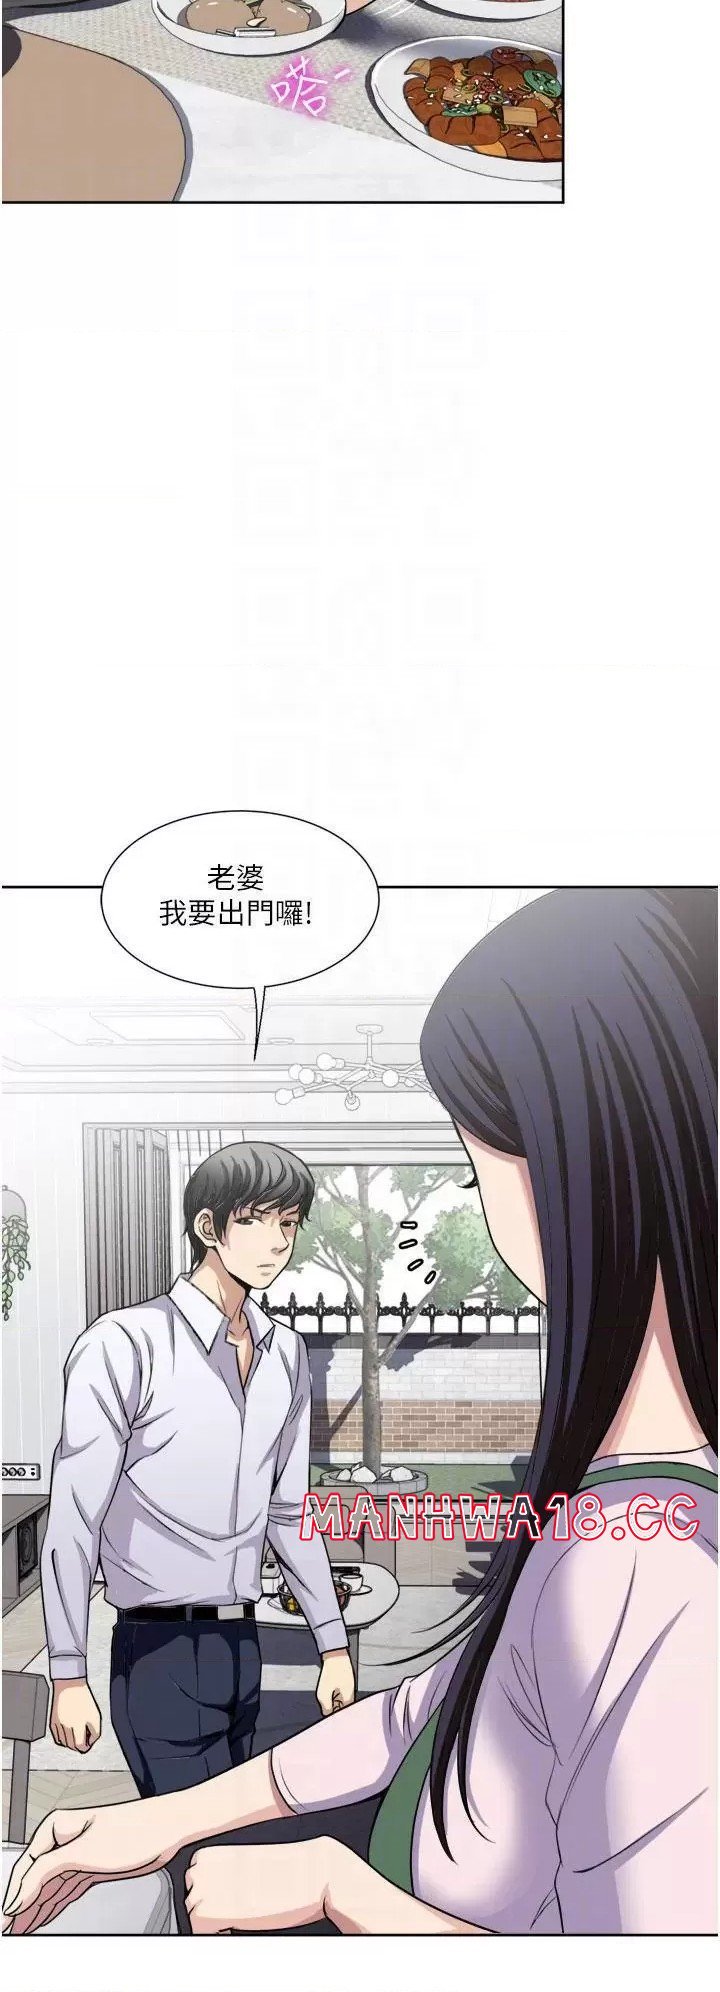 just-once-raw-chap-24-5